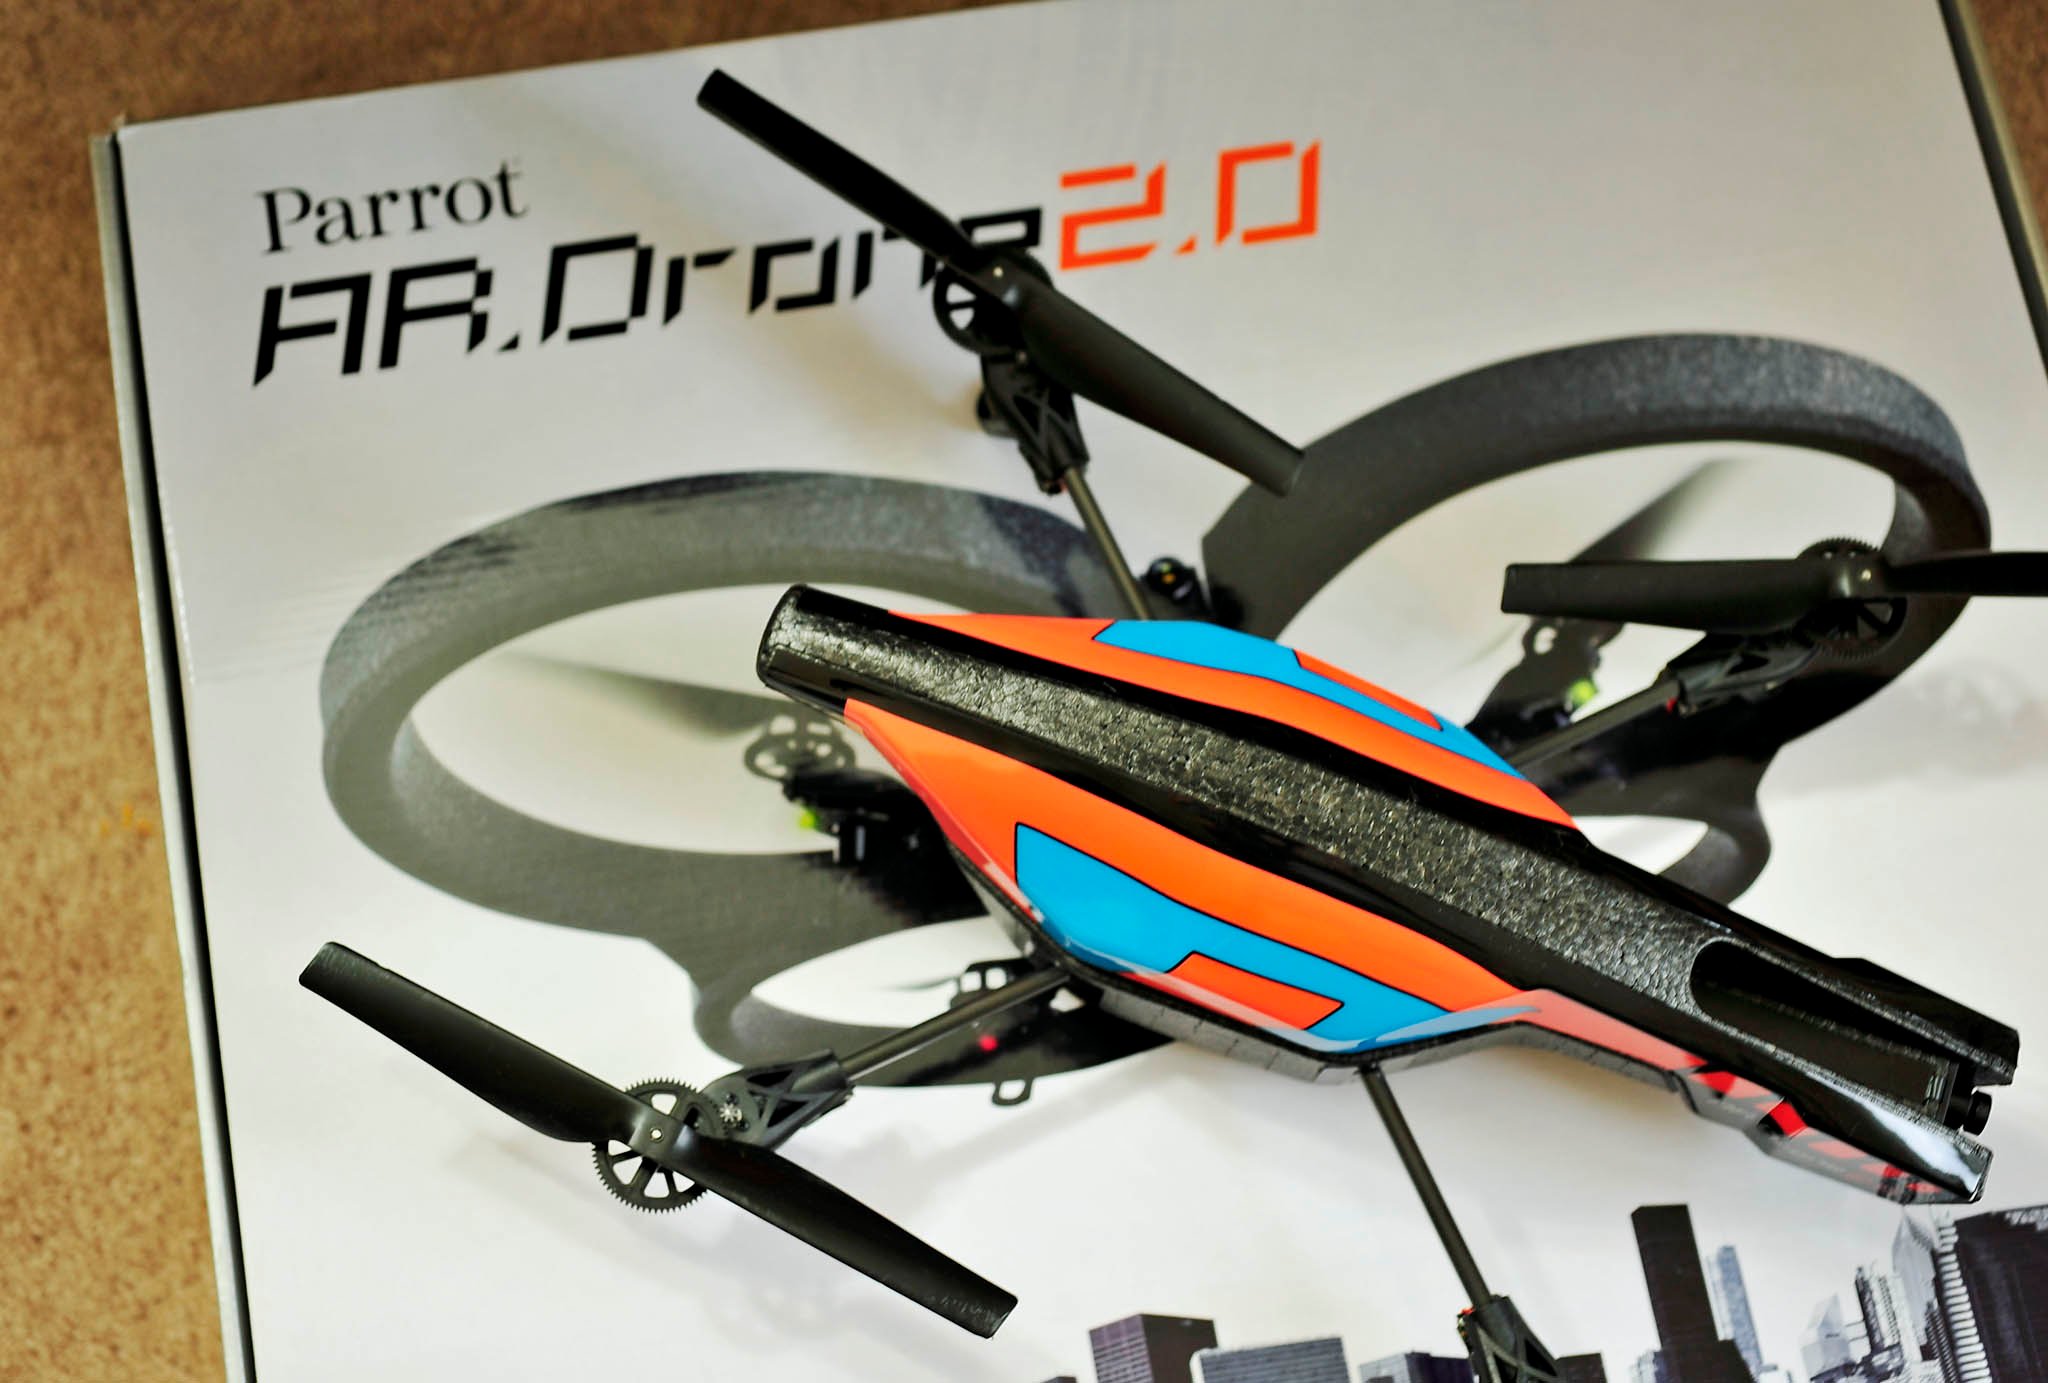 Ar drone 2.0 instructions